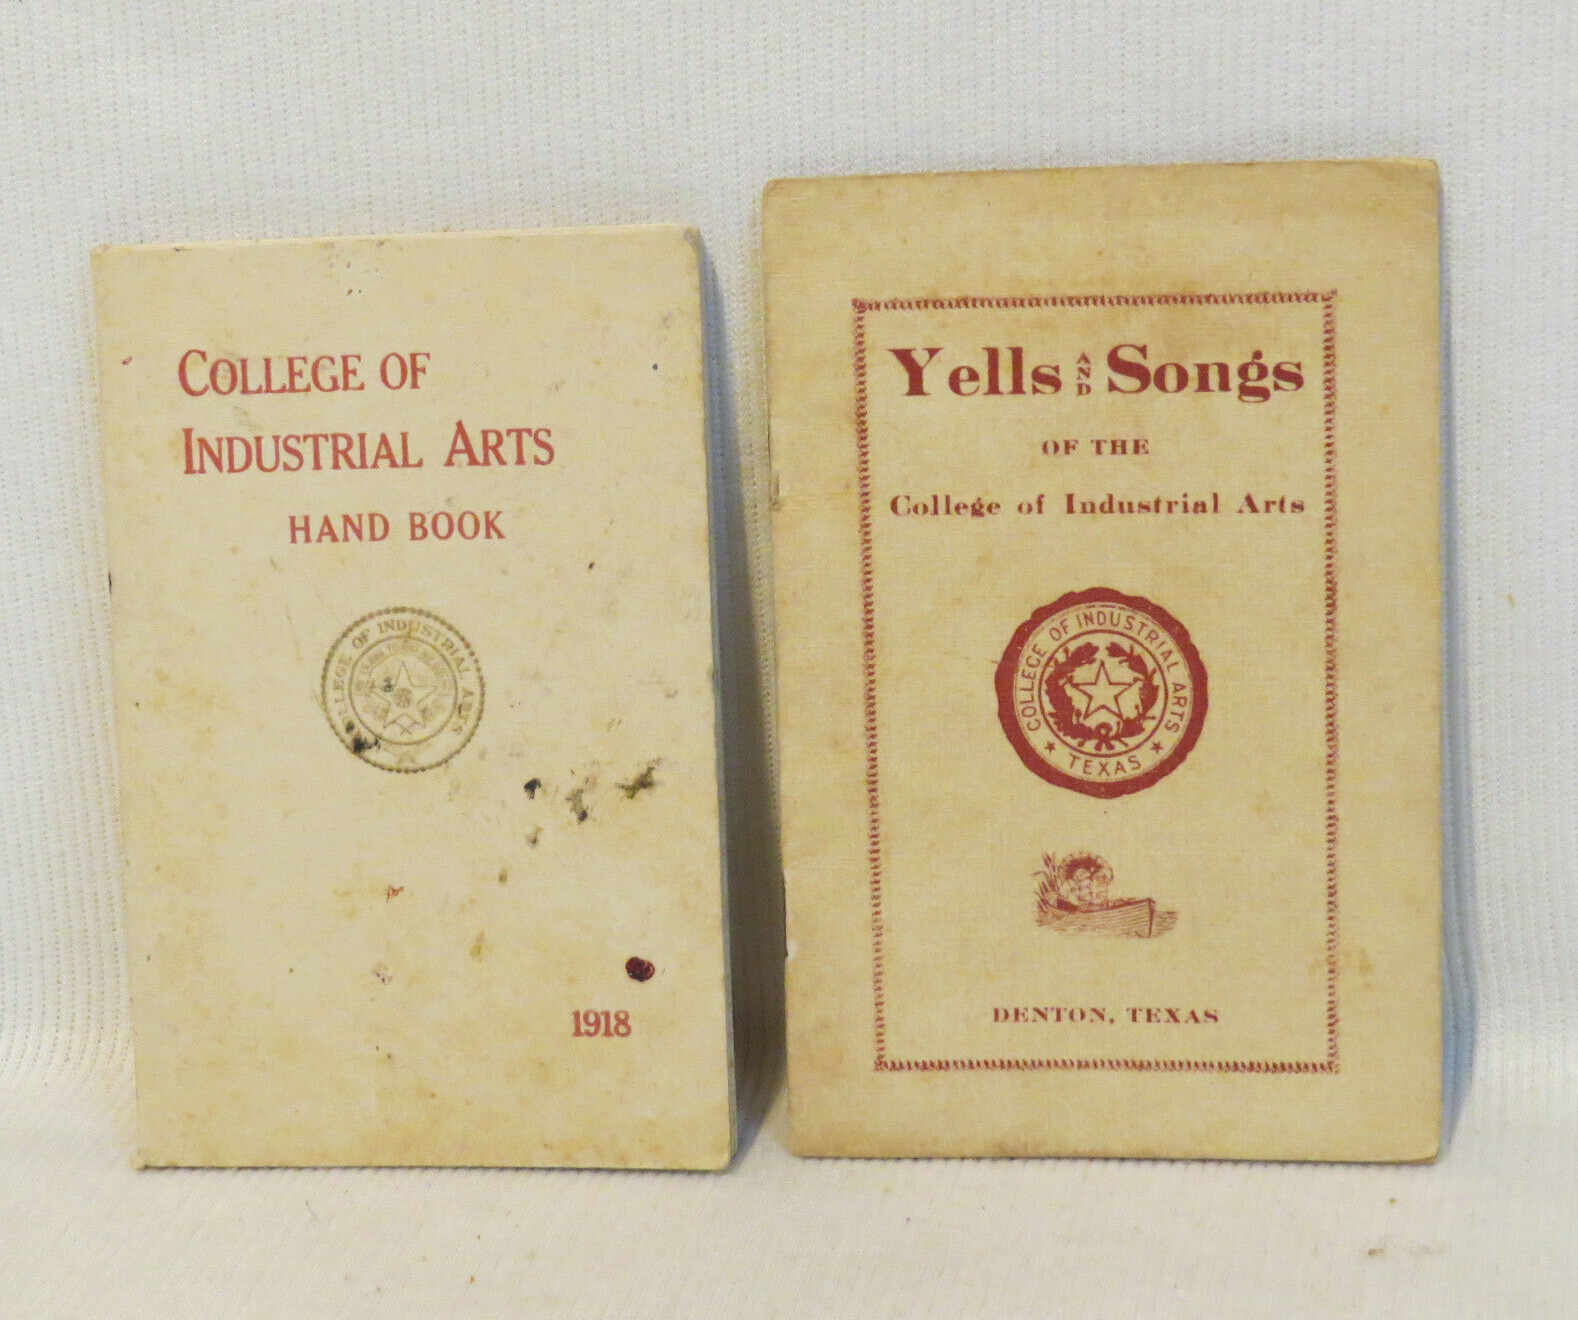 RARE 1918 College of Industrial Arts HAND BOOK and 